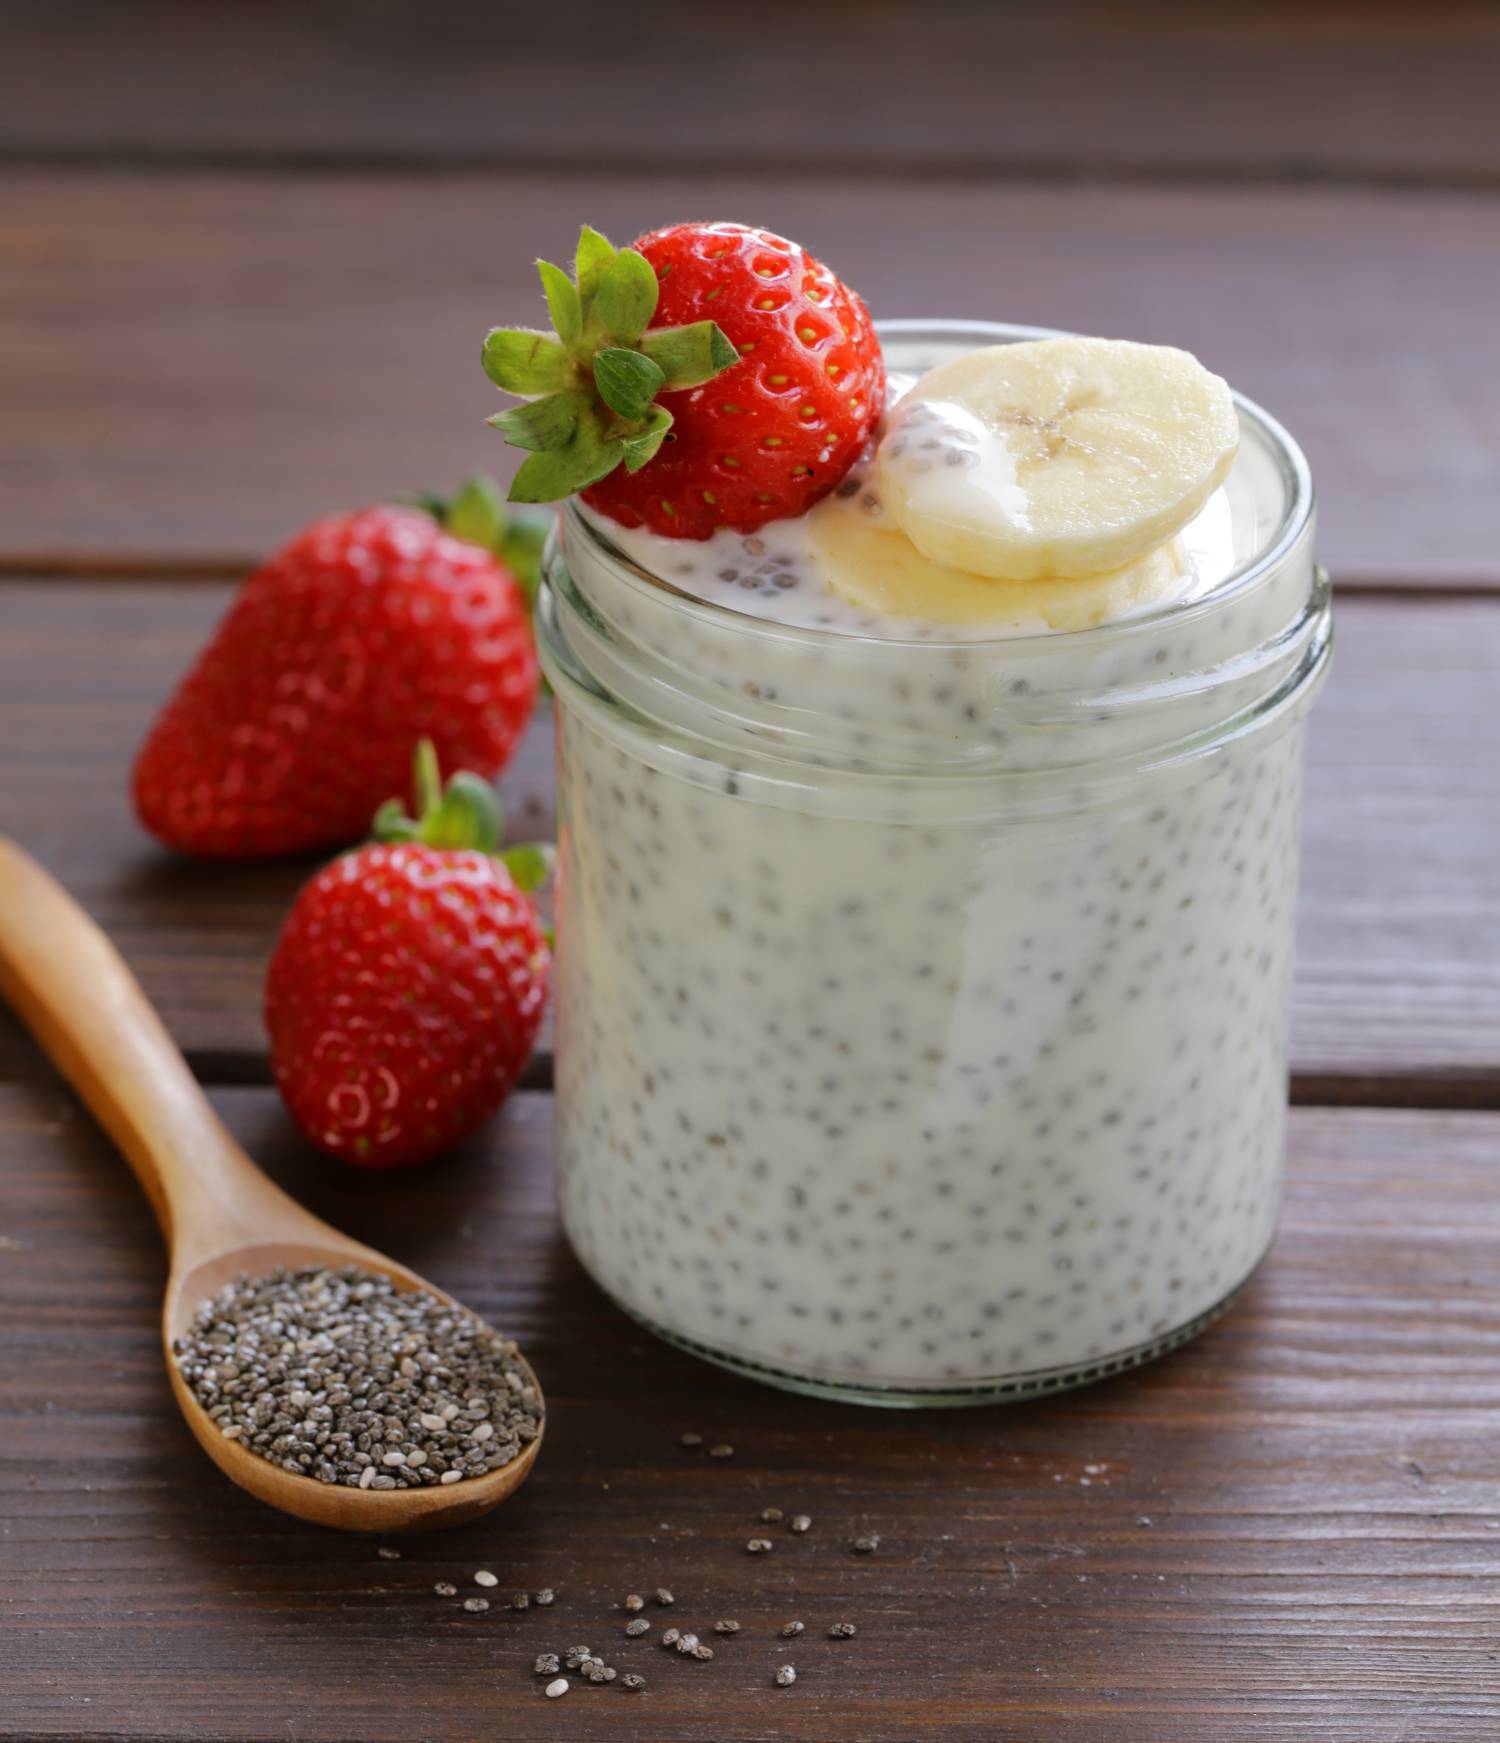 Yogurt and chia seed pudding in a jar with strawberries and bananas.